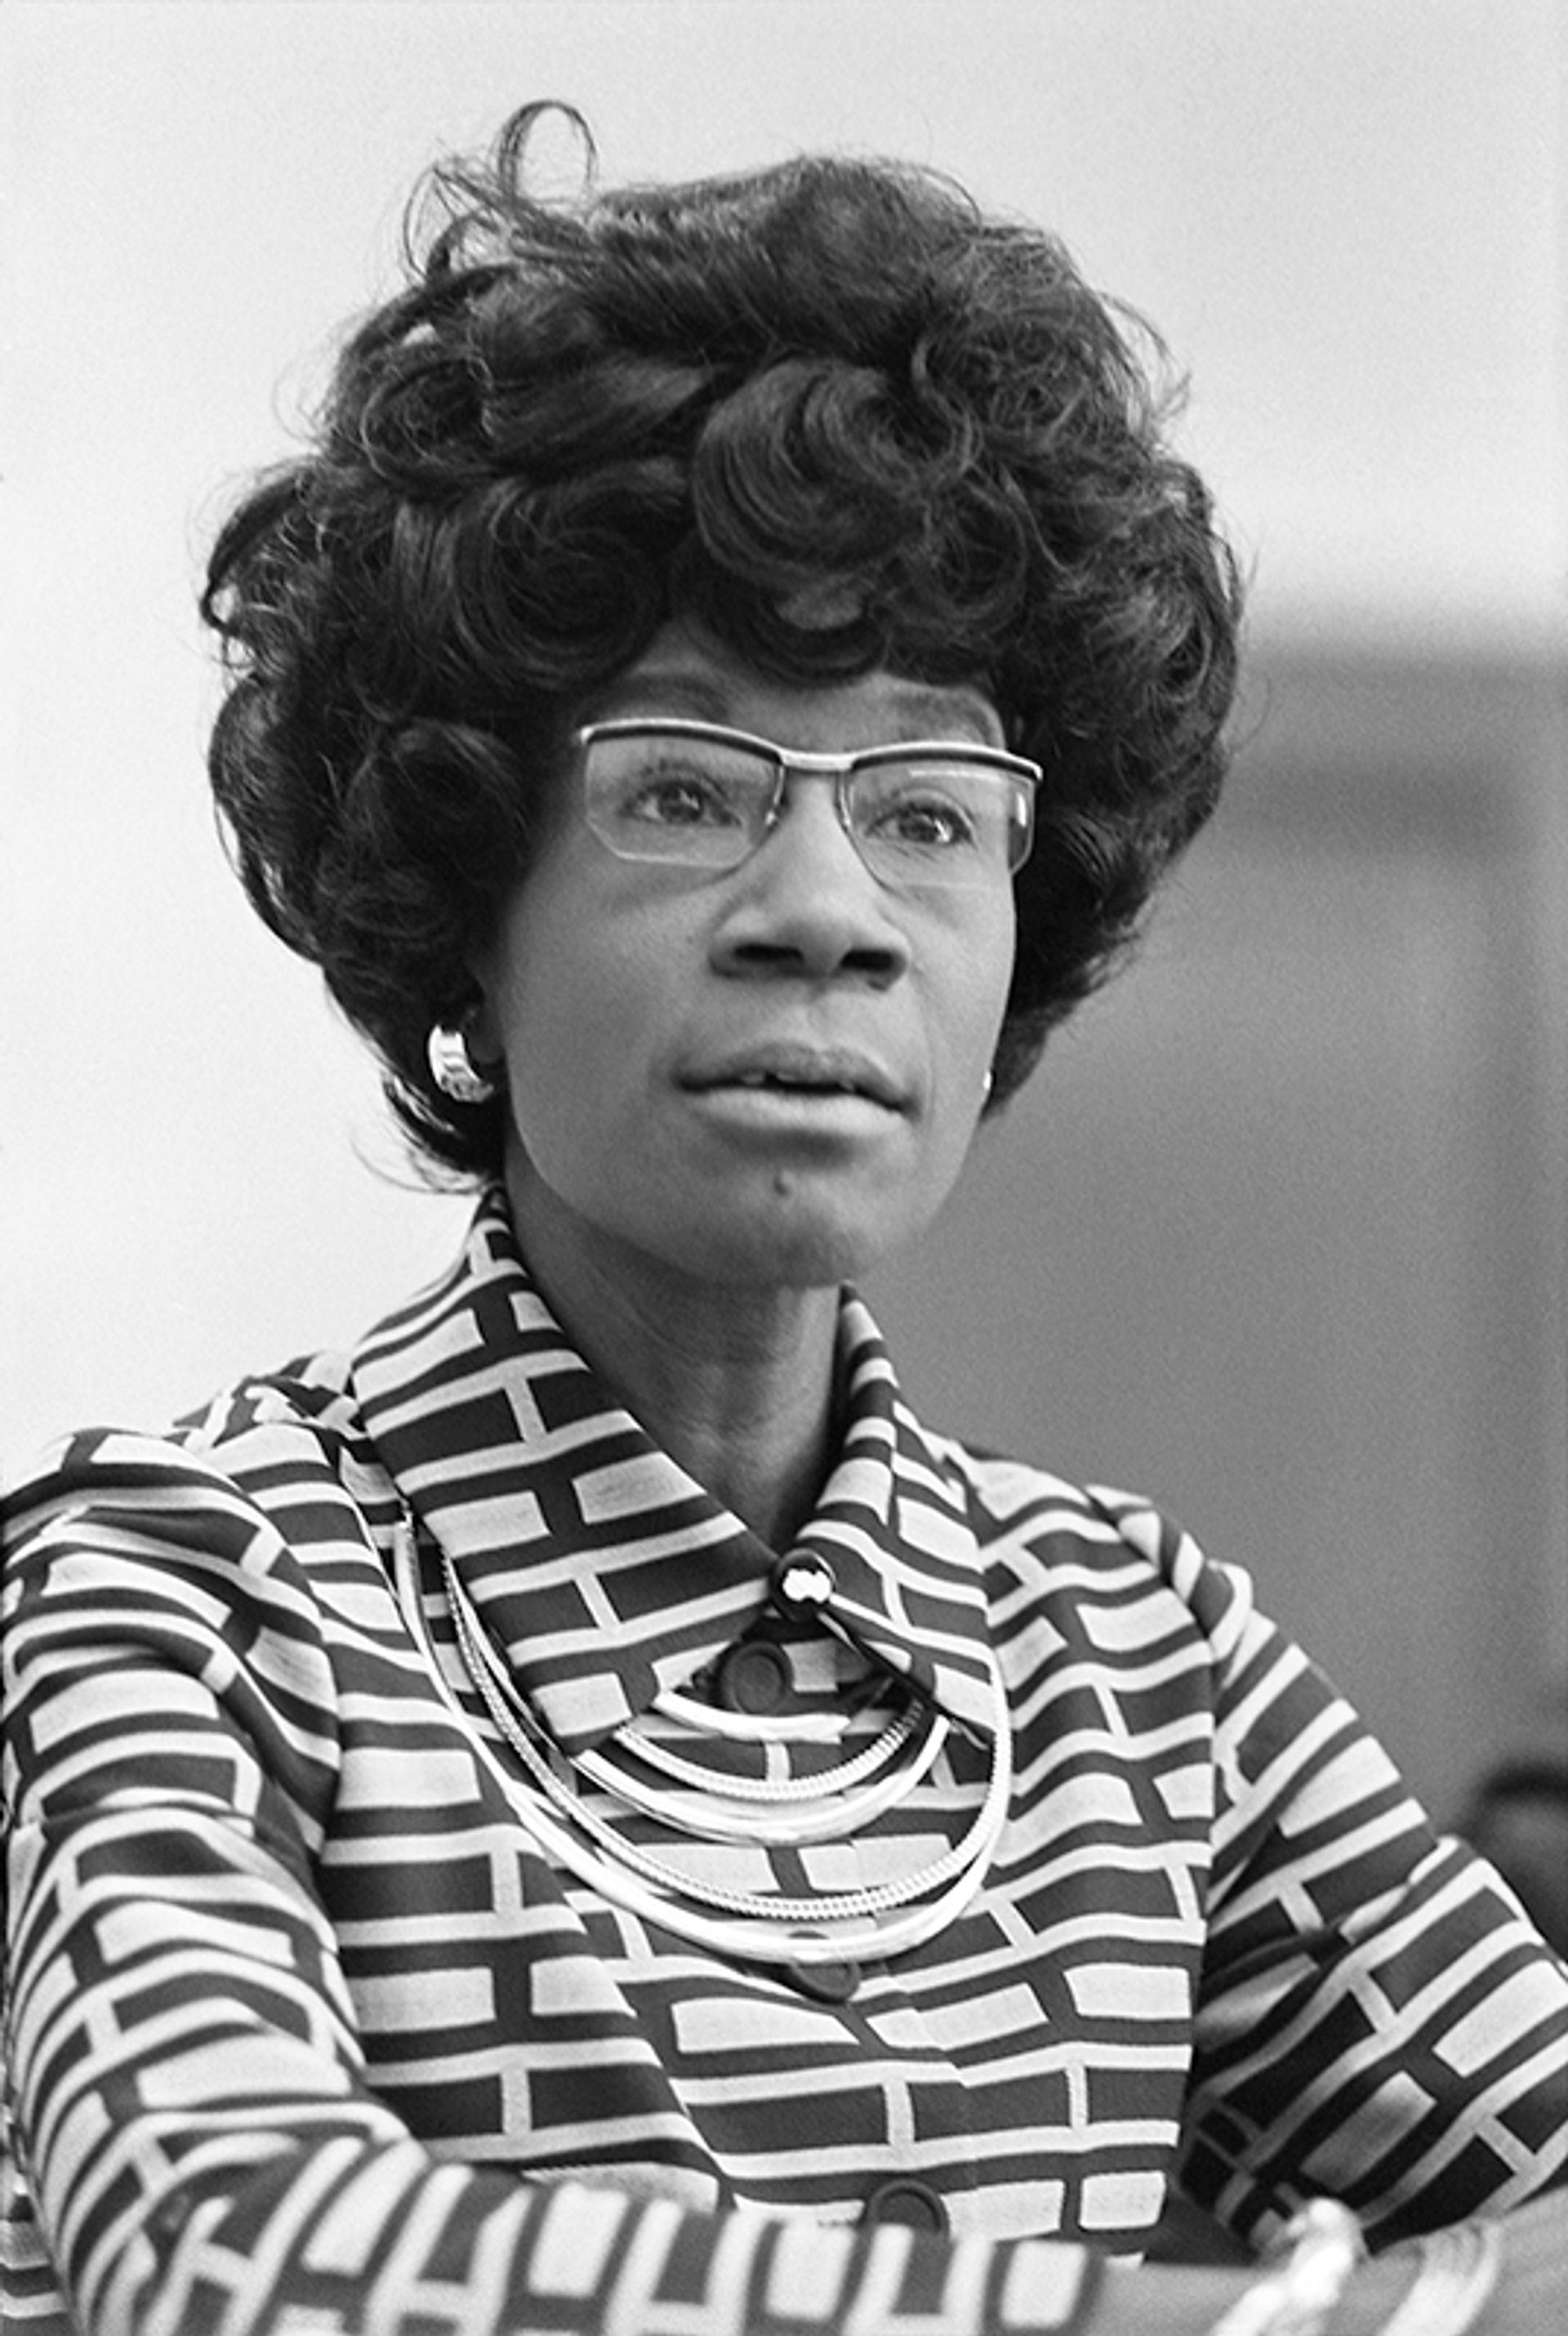 Shirley Chisholm announcing her candidacy for the US House of Representatives Thomas J. O'Halloran, U.S. News & World Reports; courtesy of the Library of Congress